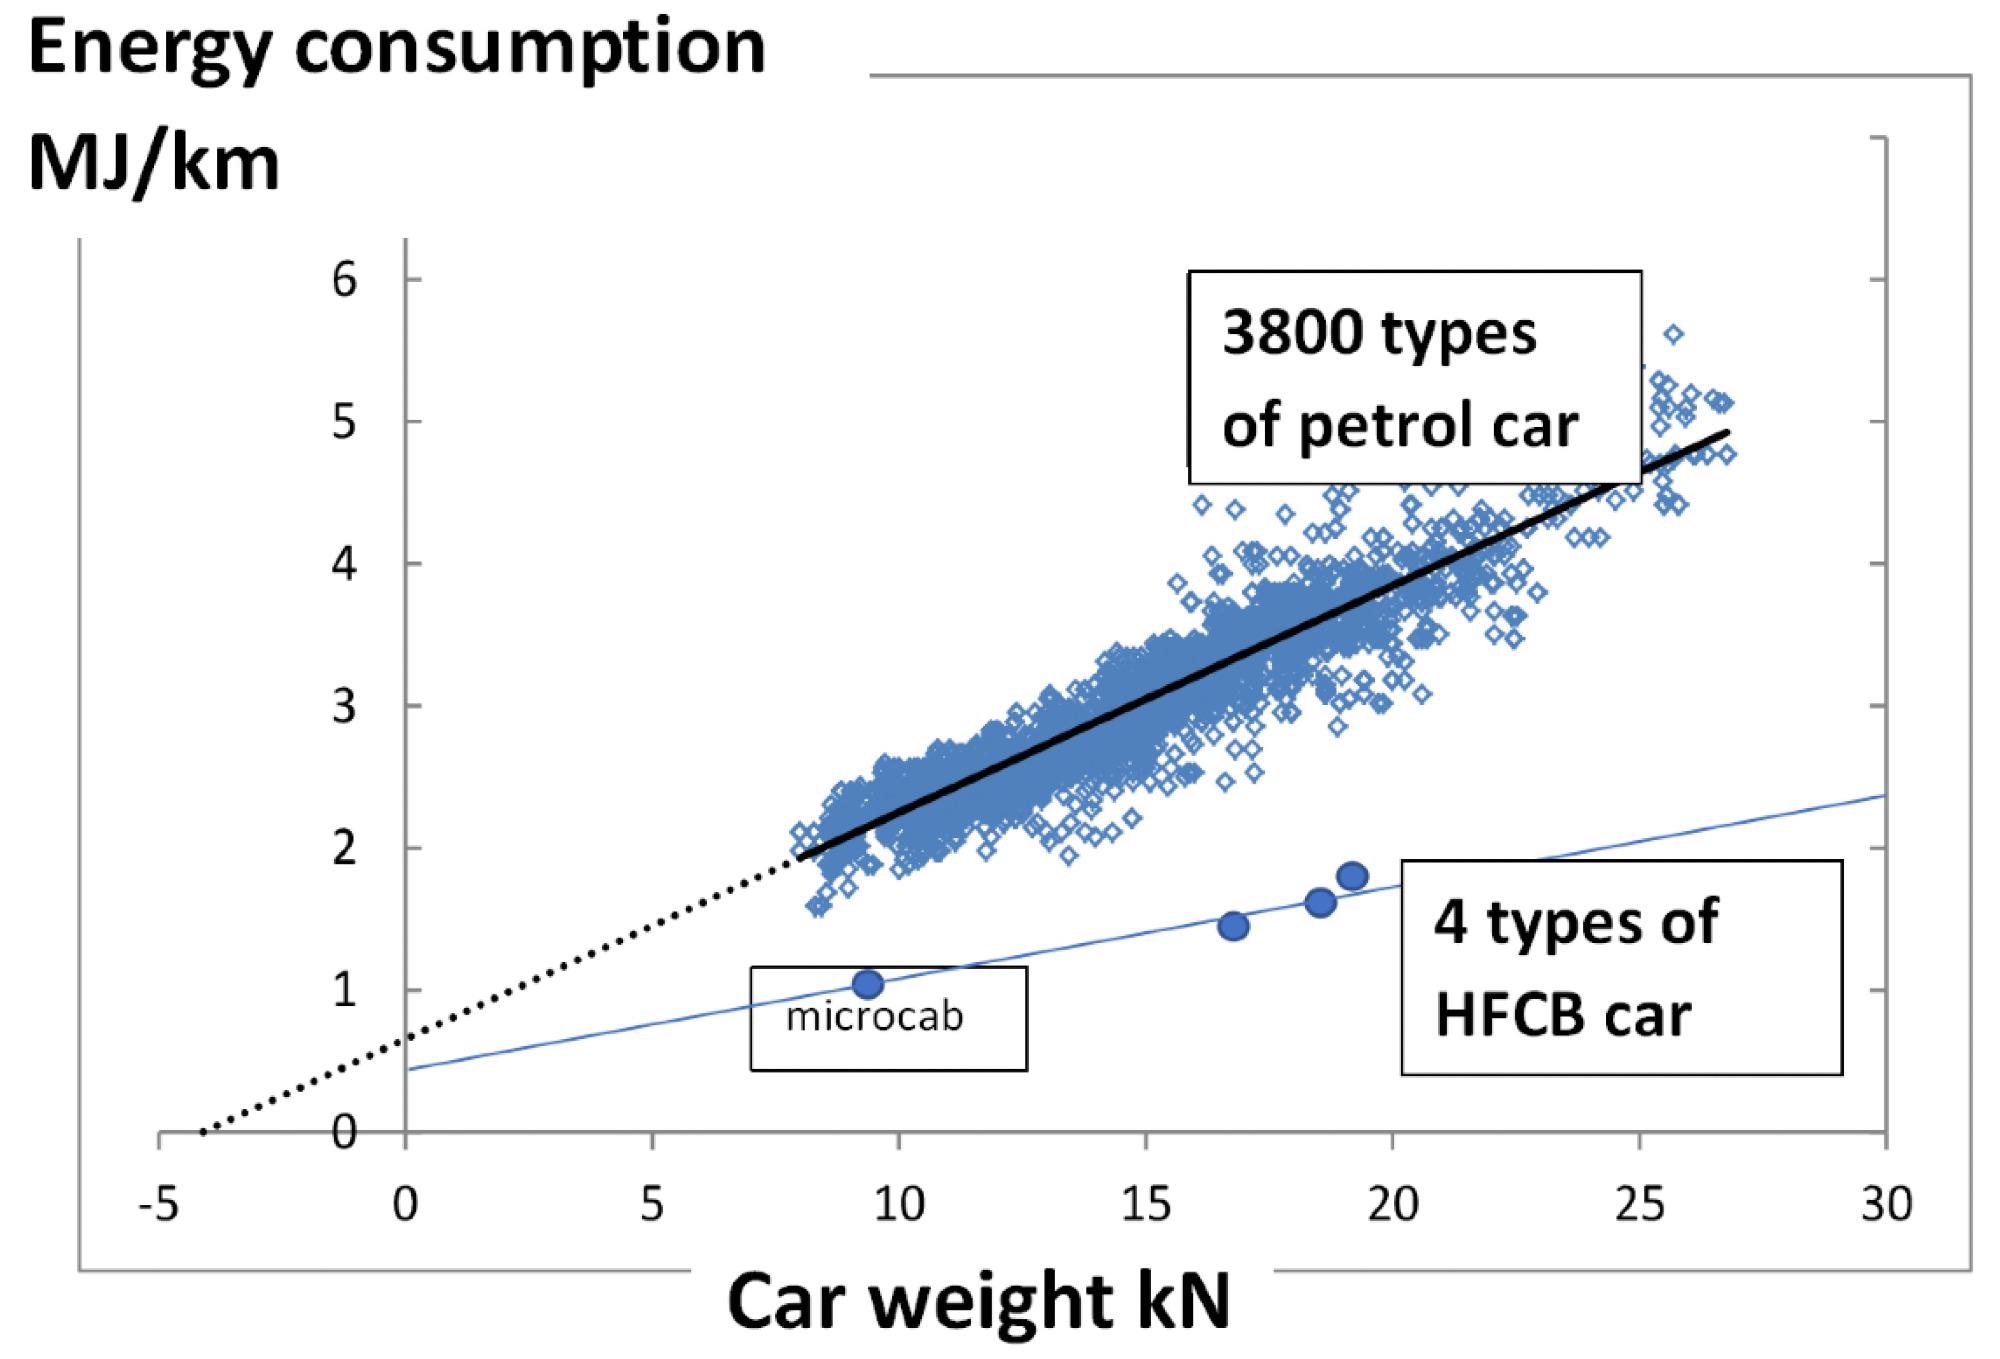 The energy consumption in MJ/km of 3800 types of gasoline combustion cars in China against vehicle weight in kN, showing the Coulomb friction law fit, for a comparison with 4 HFCB cars in pre-production.